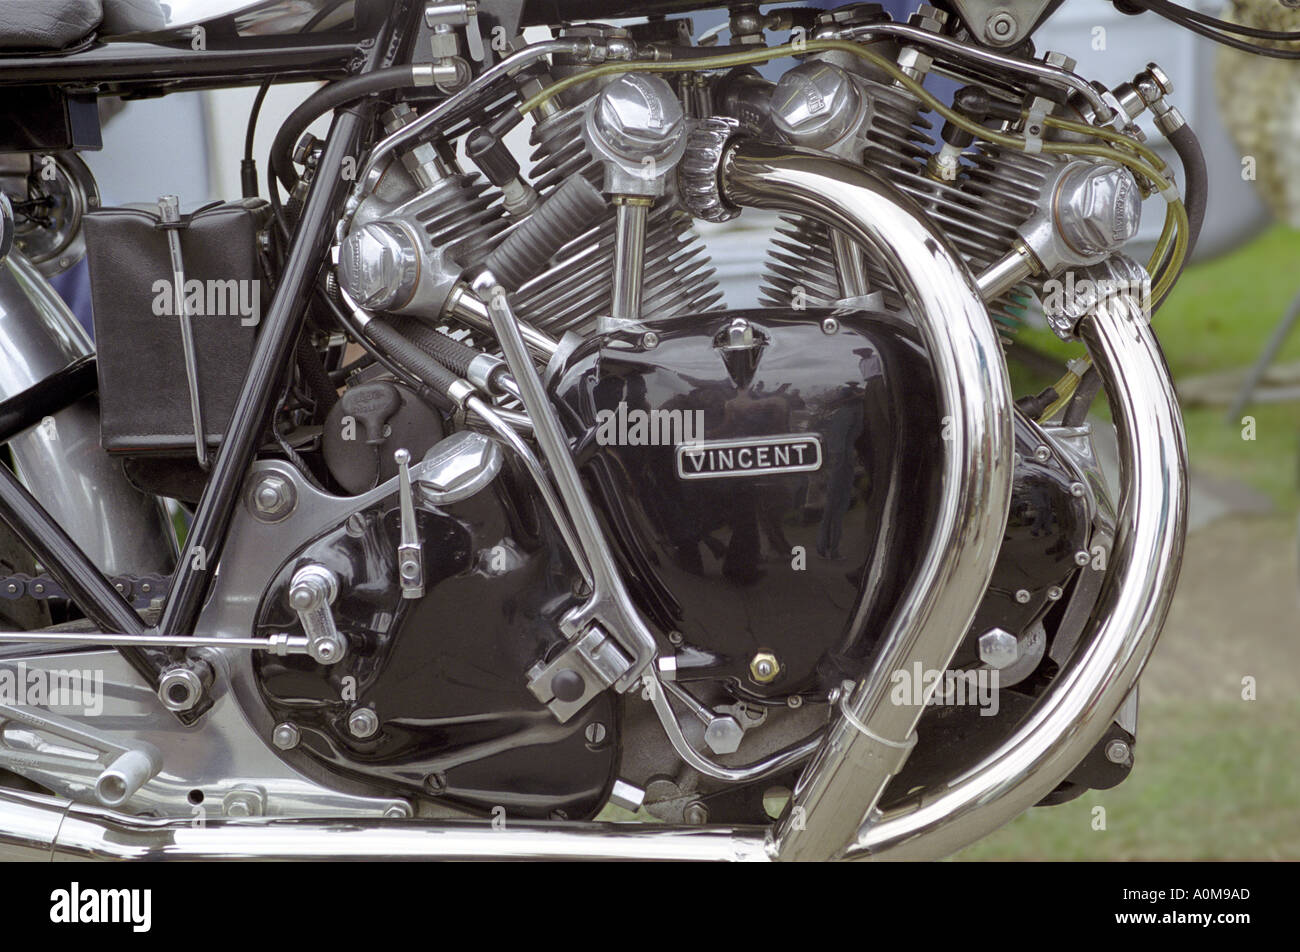 Engine detail of beautifully restored classic british motorcycle of the 1950 s era the 998 cc Vincent V twin Stock Photo